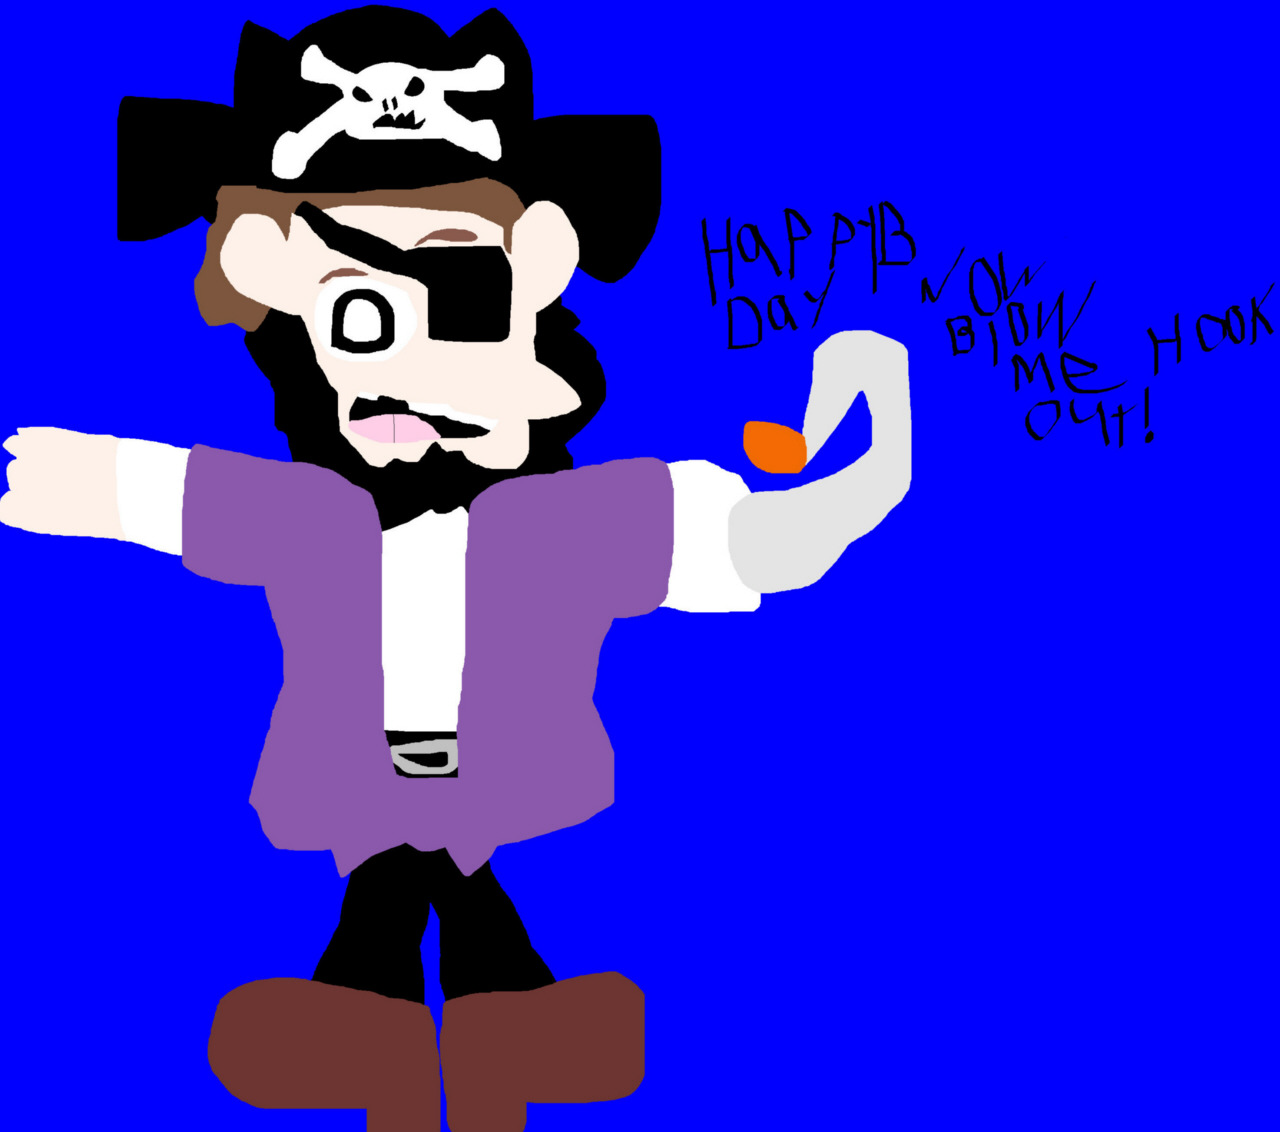 Happy B Day To Cavity Sam Now Blow Me Hook Out MS Paint by Falconlobo